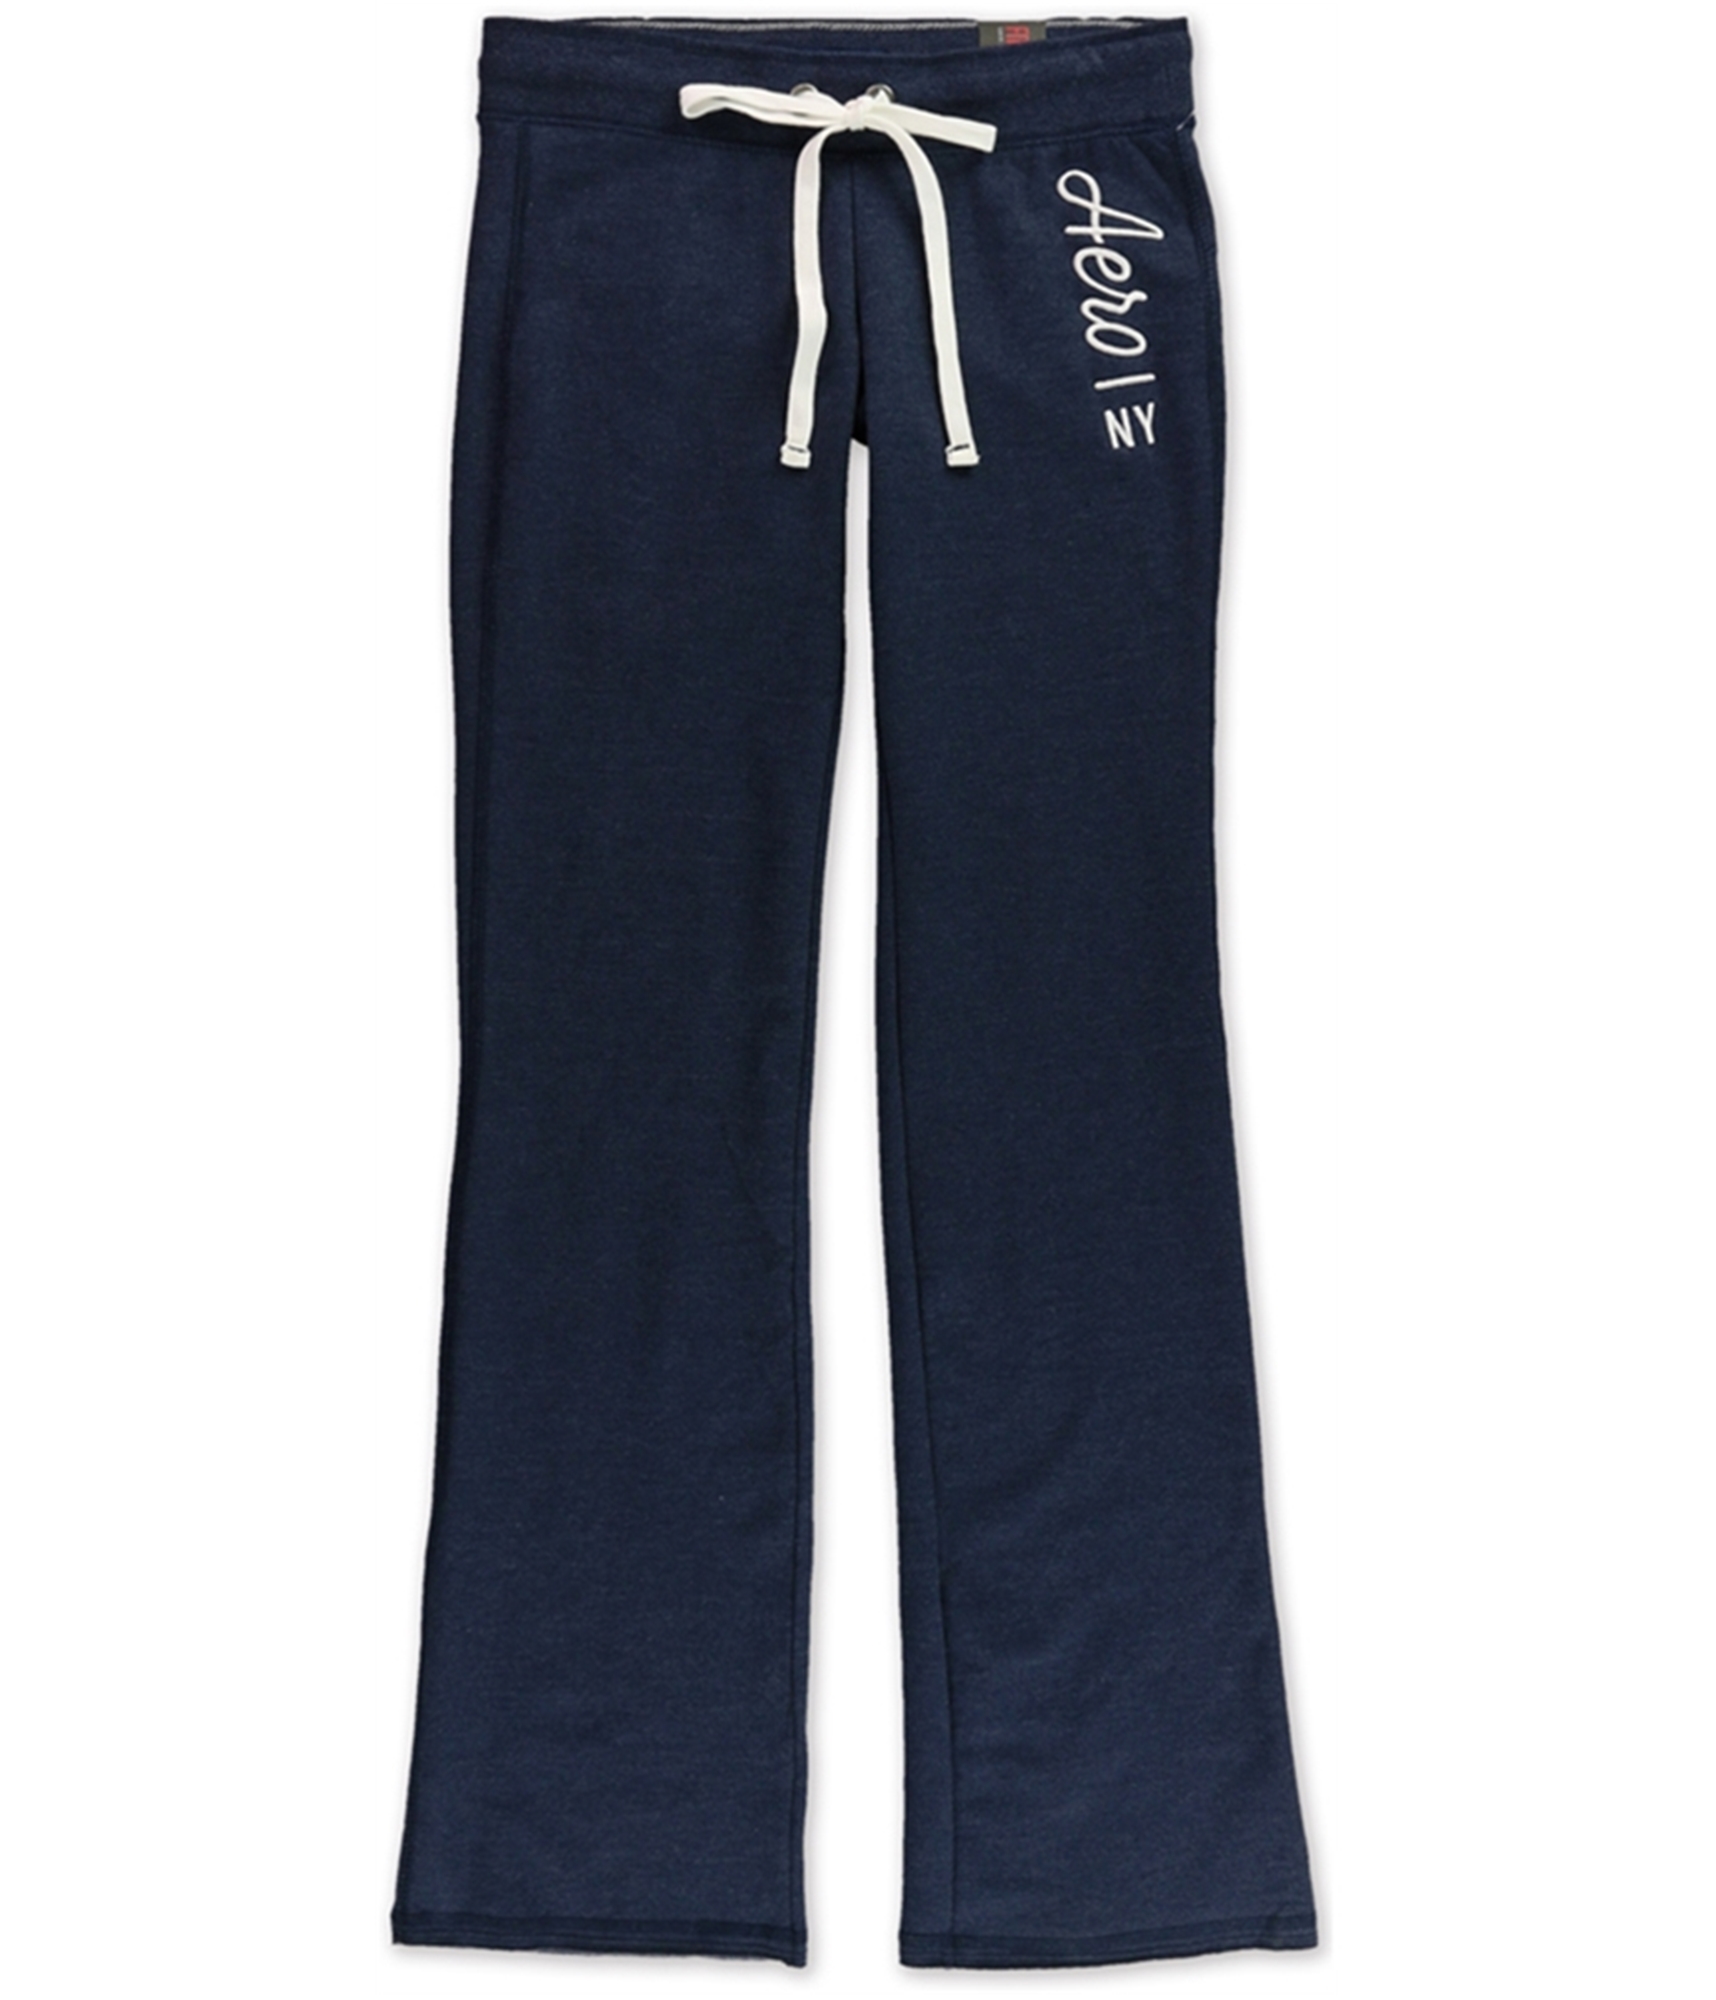 Buy a Aeropostale Womens Fit & Flare Casual Sweatpants, TW6